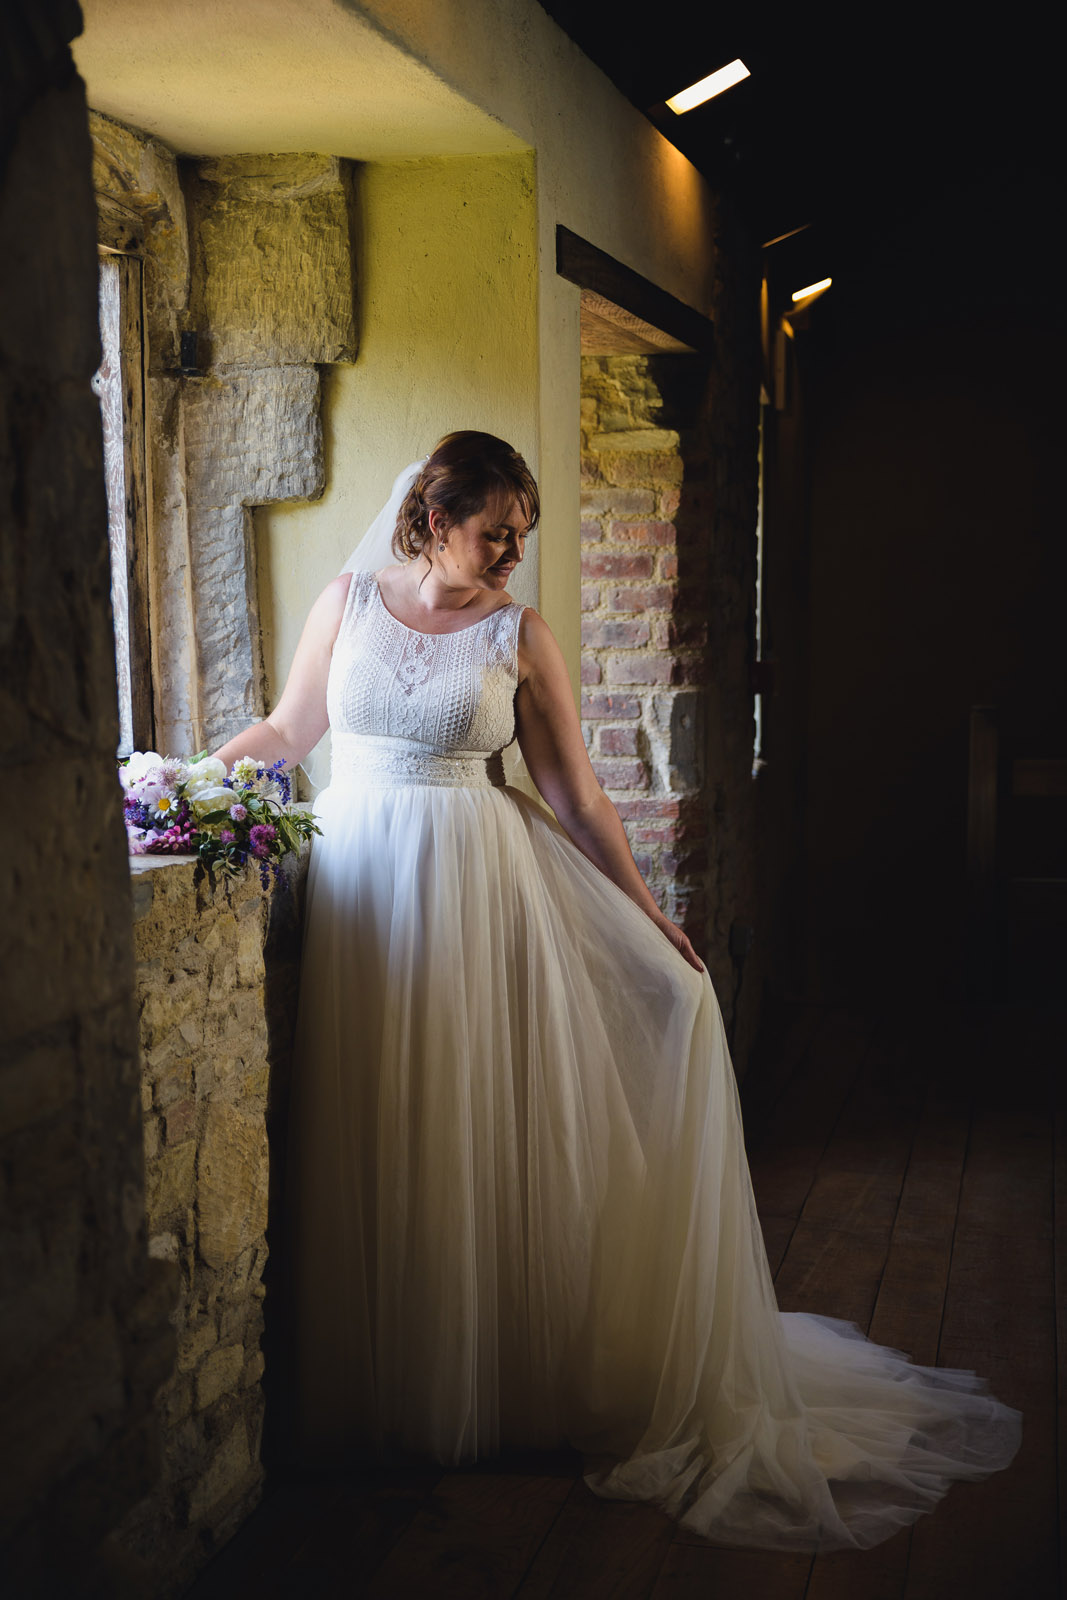 Wedding Photography at Blackfriars Priory Gloucester